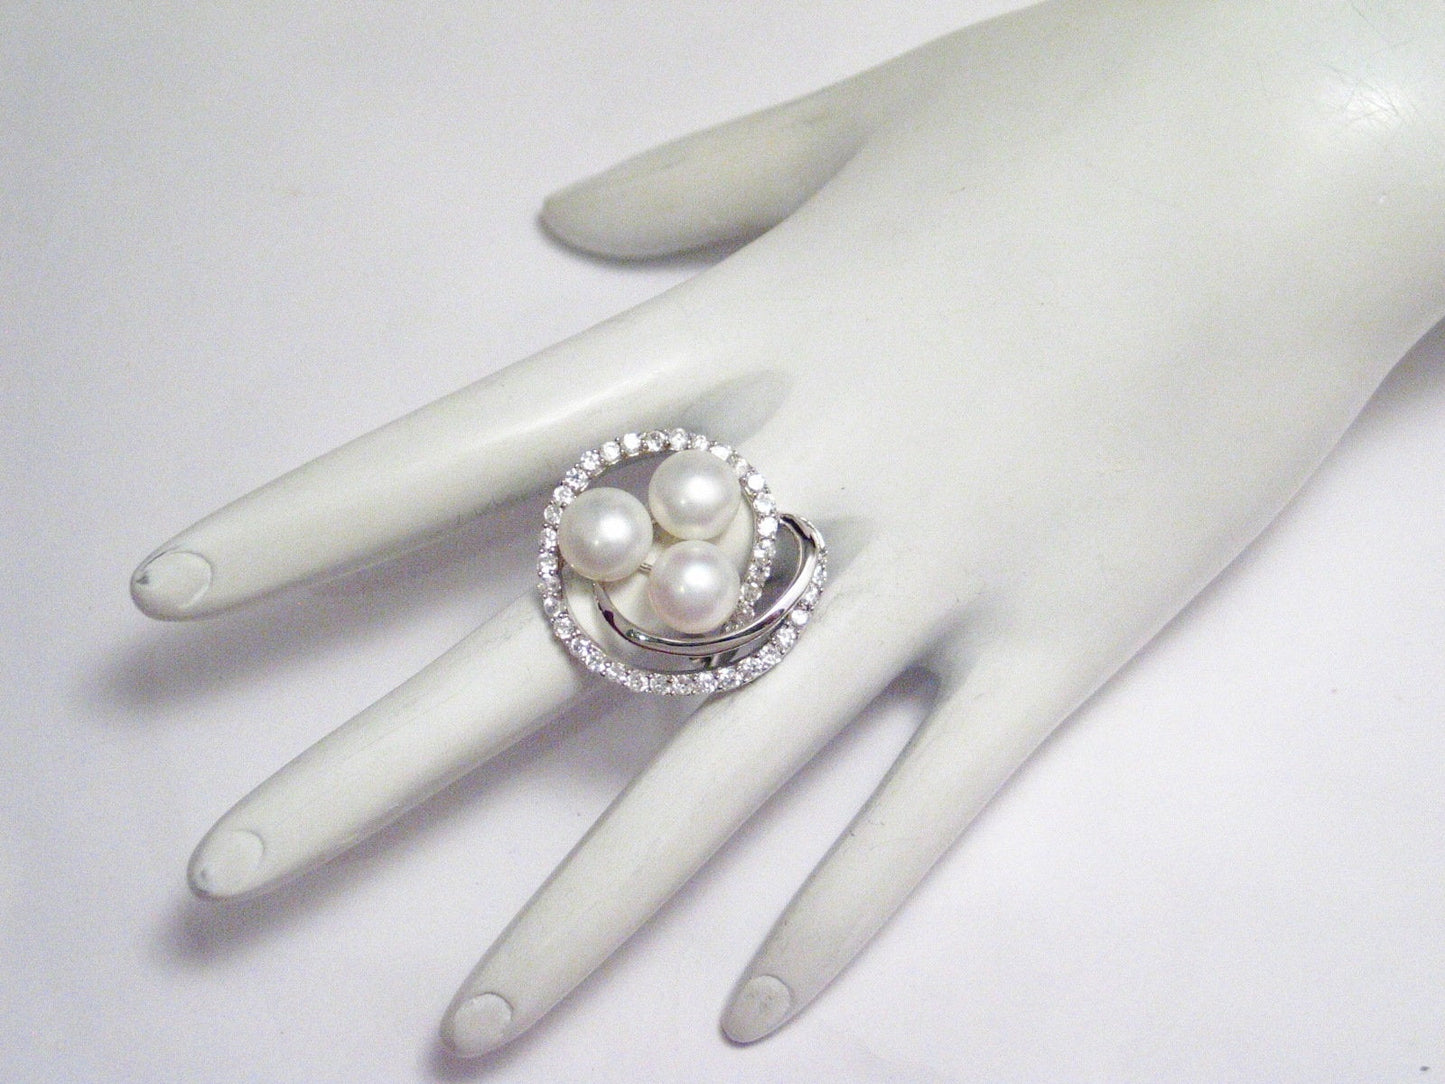 Ring | Womens Big Sterling Silver Glittery Cz & White Pearl Spiral Cocktail Ring  8.75 | Jewelry